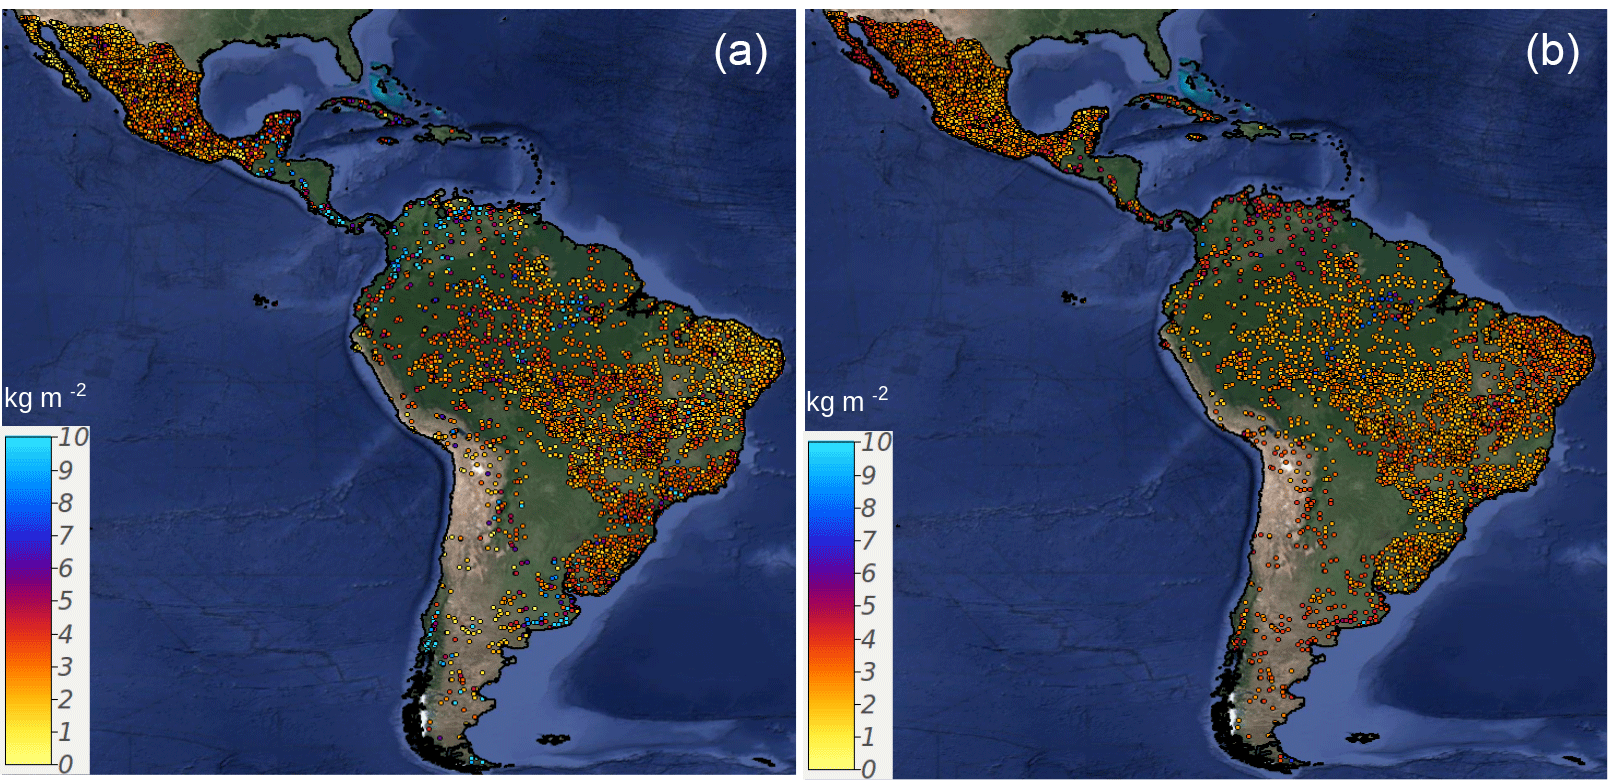 Soil No Silver Bullet For Digital Soil Mapping Country Specific Soil Organic Carbon Estimates Across Latin America